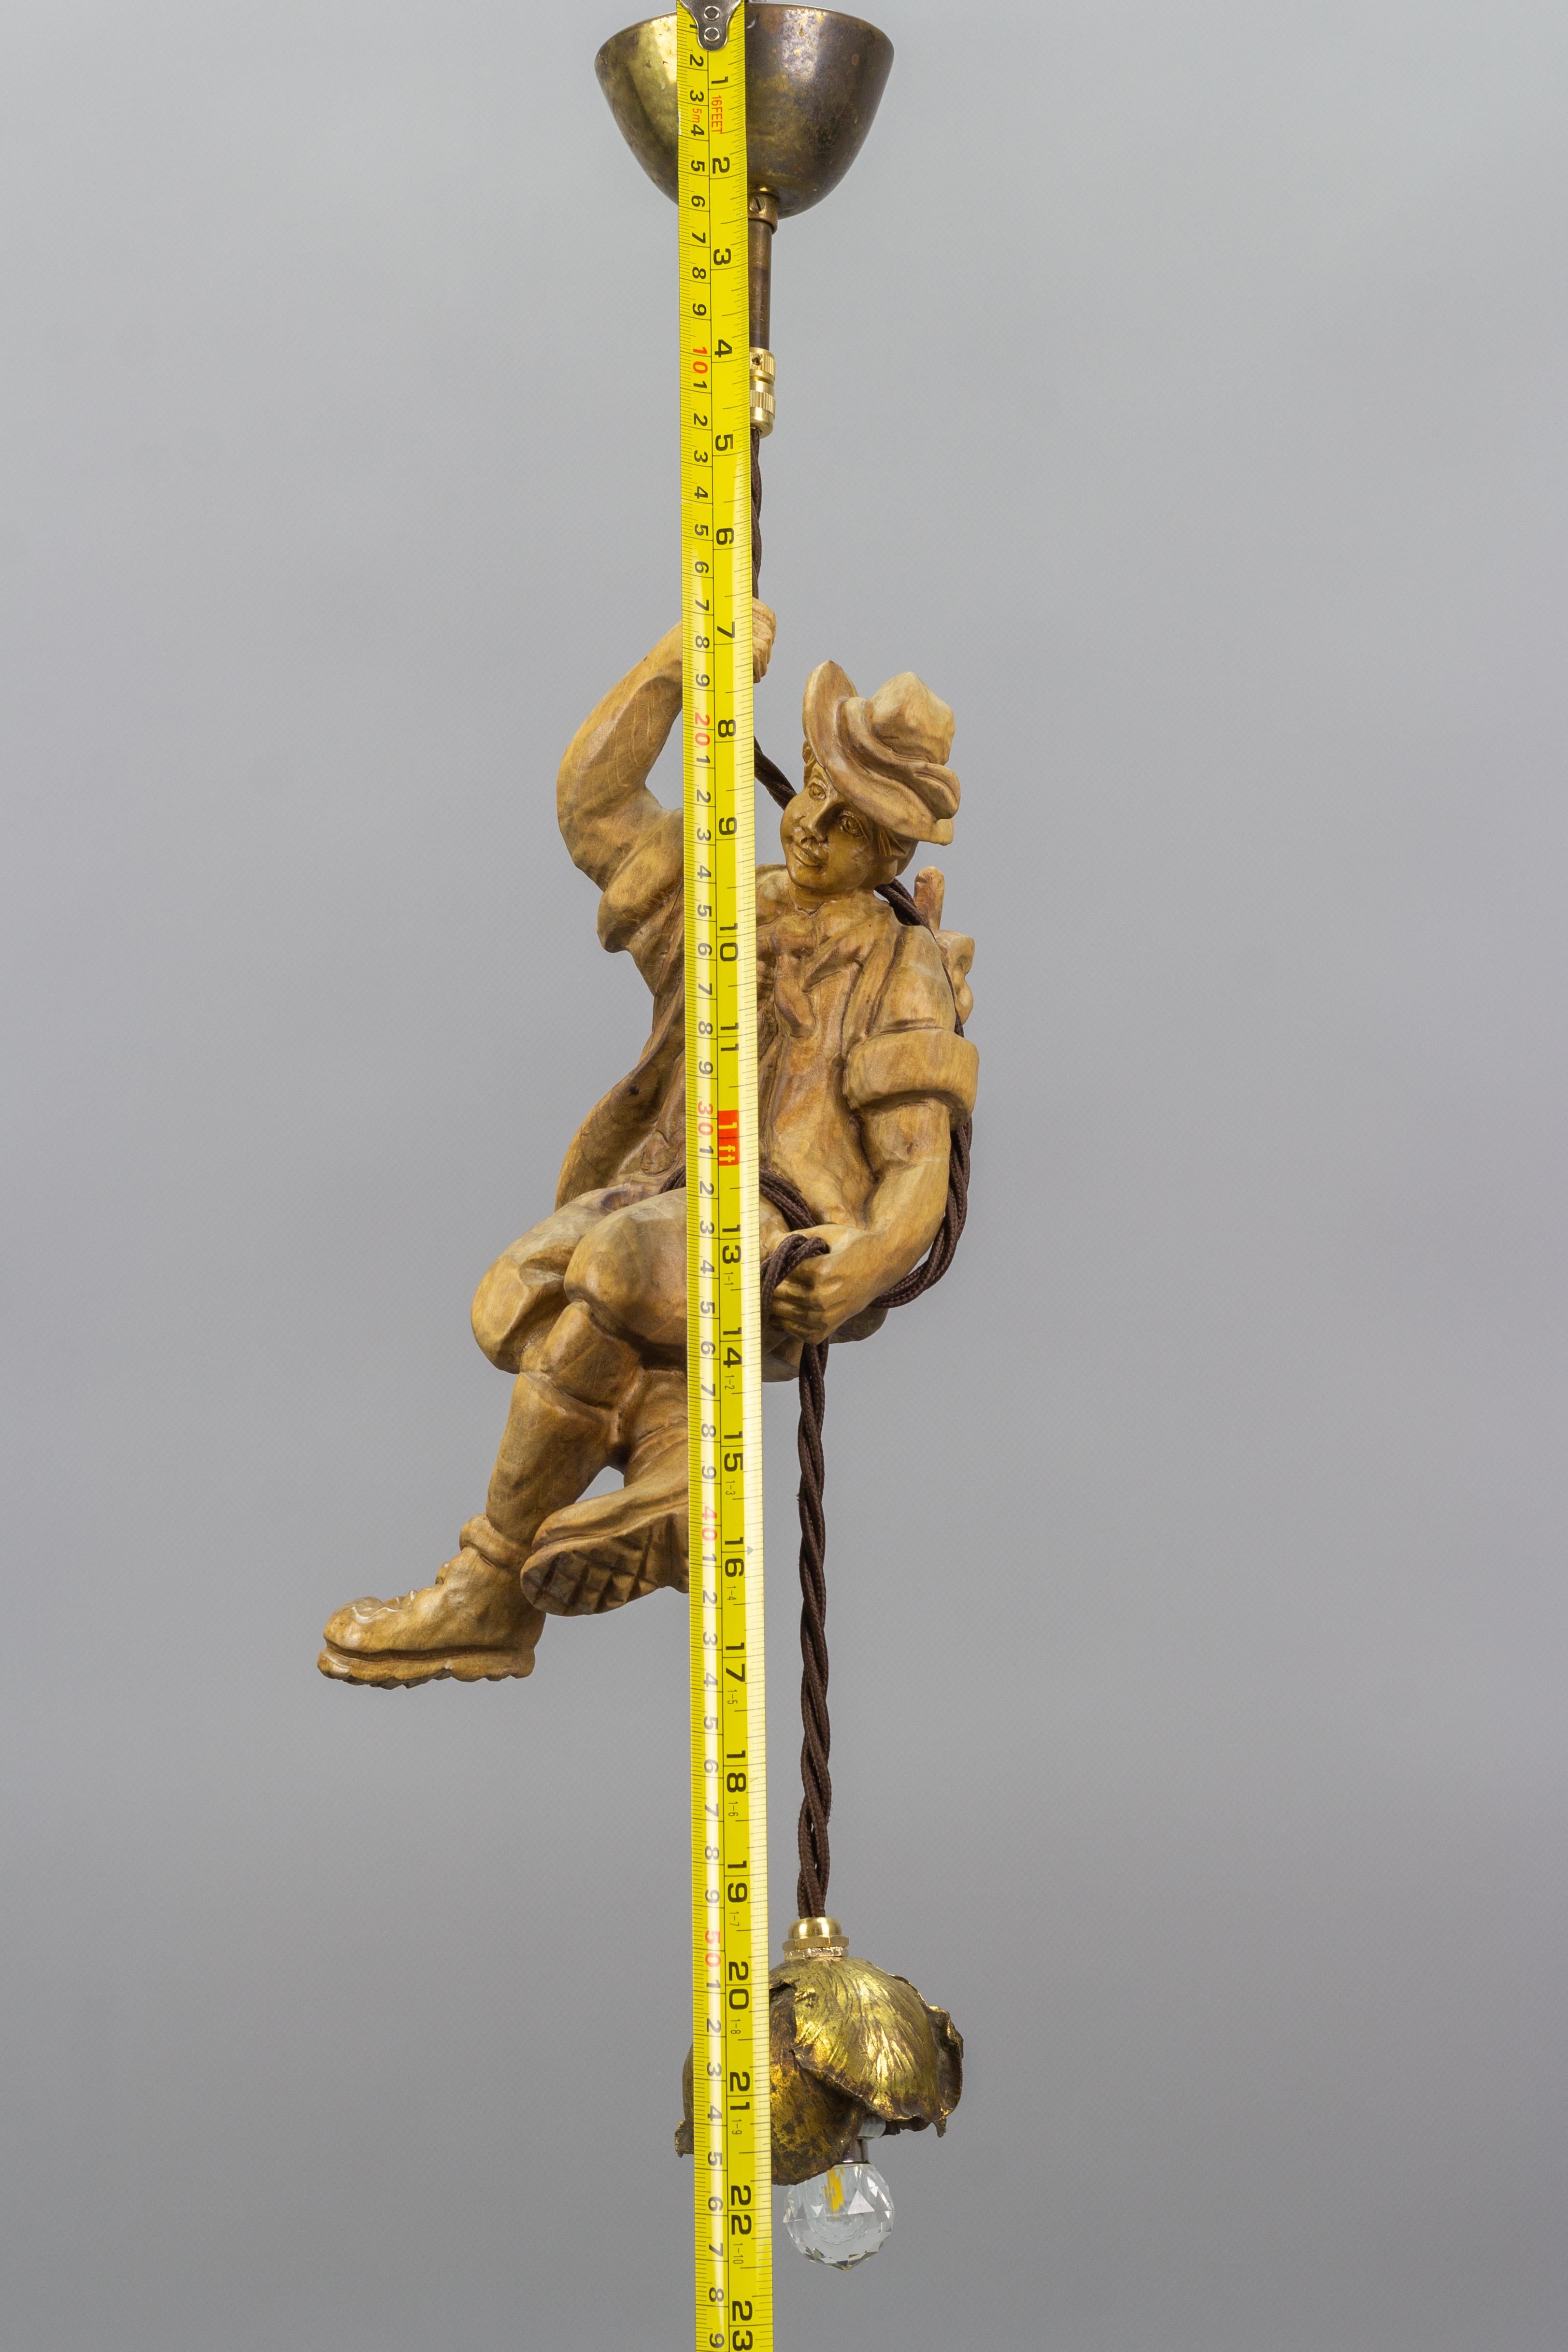 Hanging Brass Light Fixture with a Wooden Figure of a Mountain Climber For Sale 10